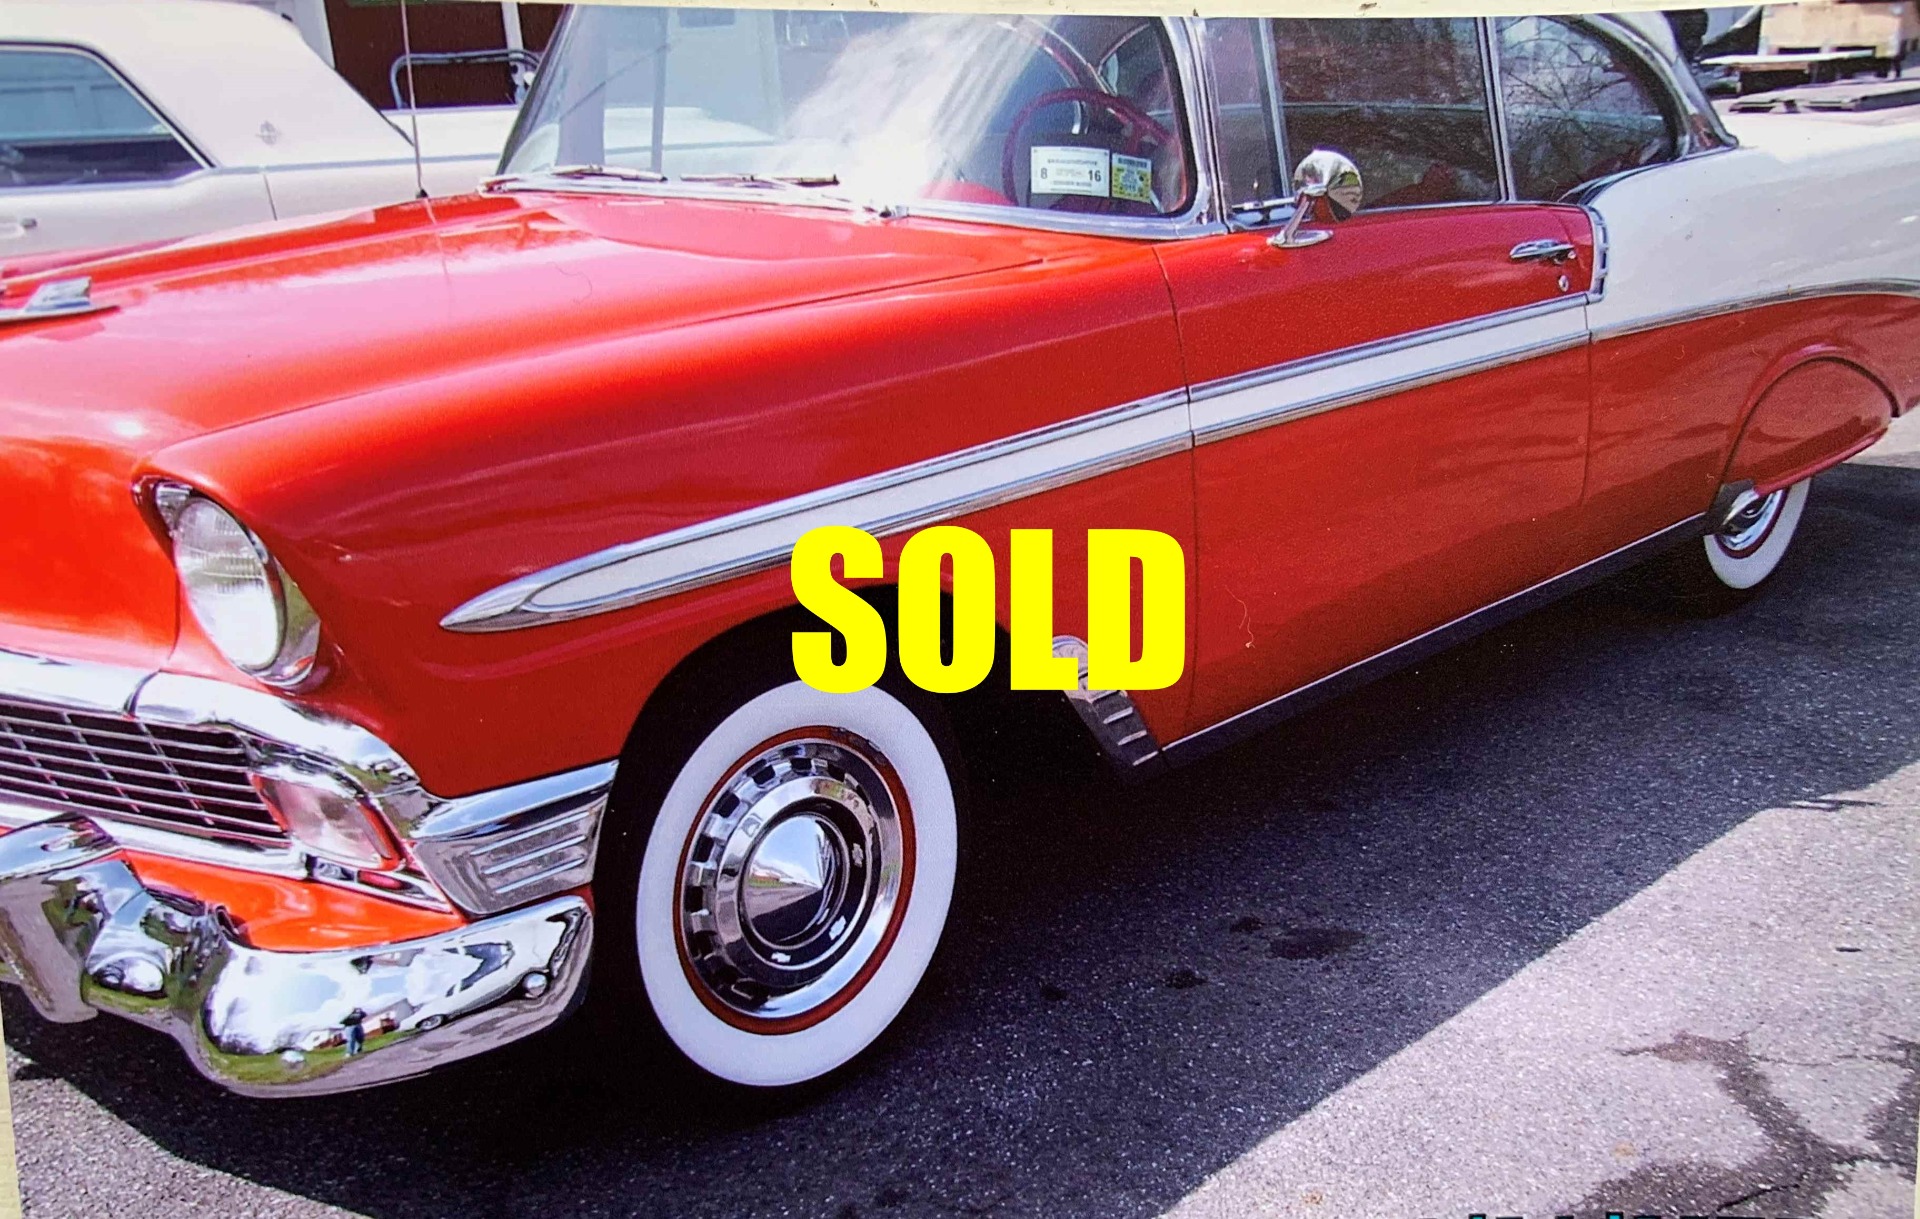 Used 1956 Chevrolet Bel Air  174 , For Sale $53000, Call Us: (704) 996-3735